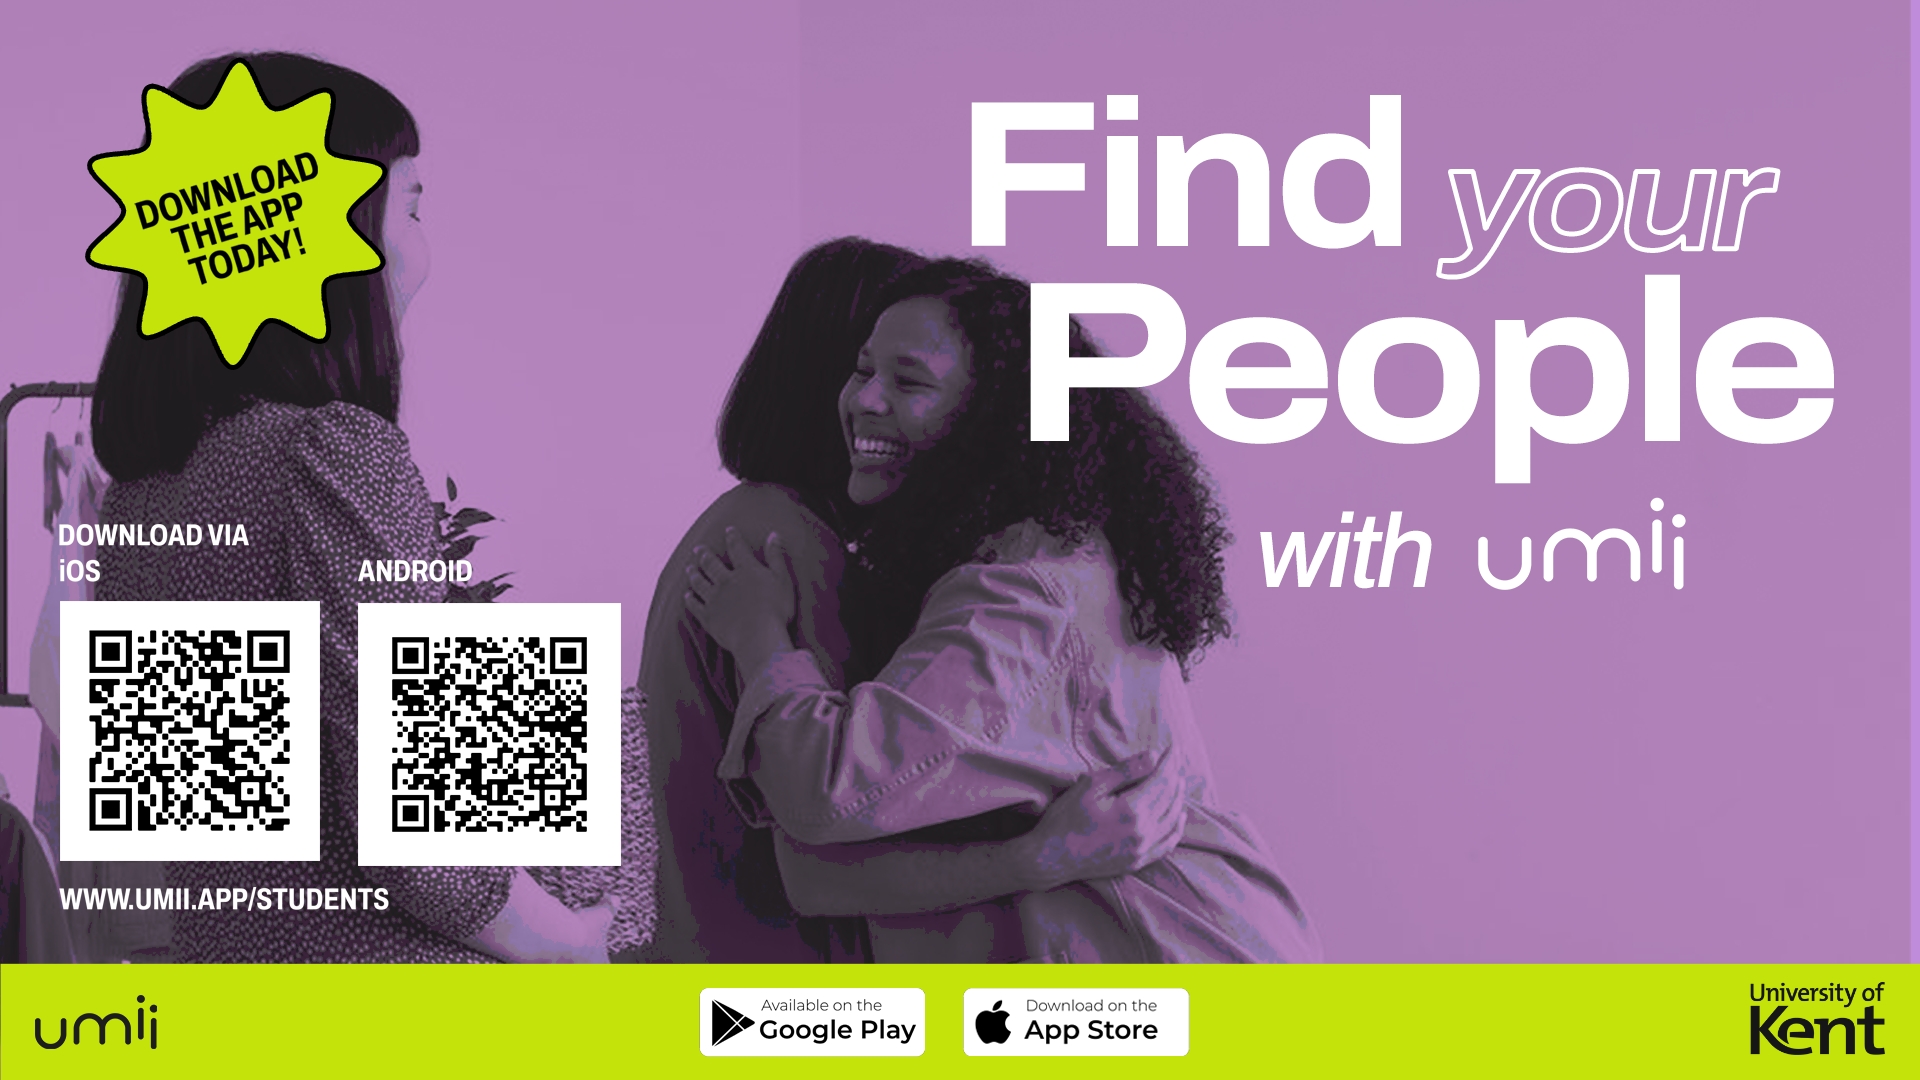 Find your people with umii